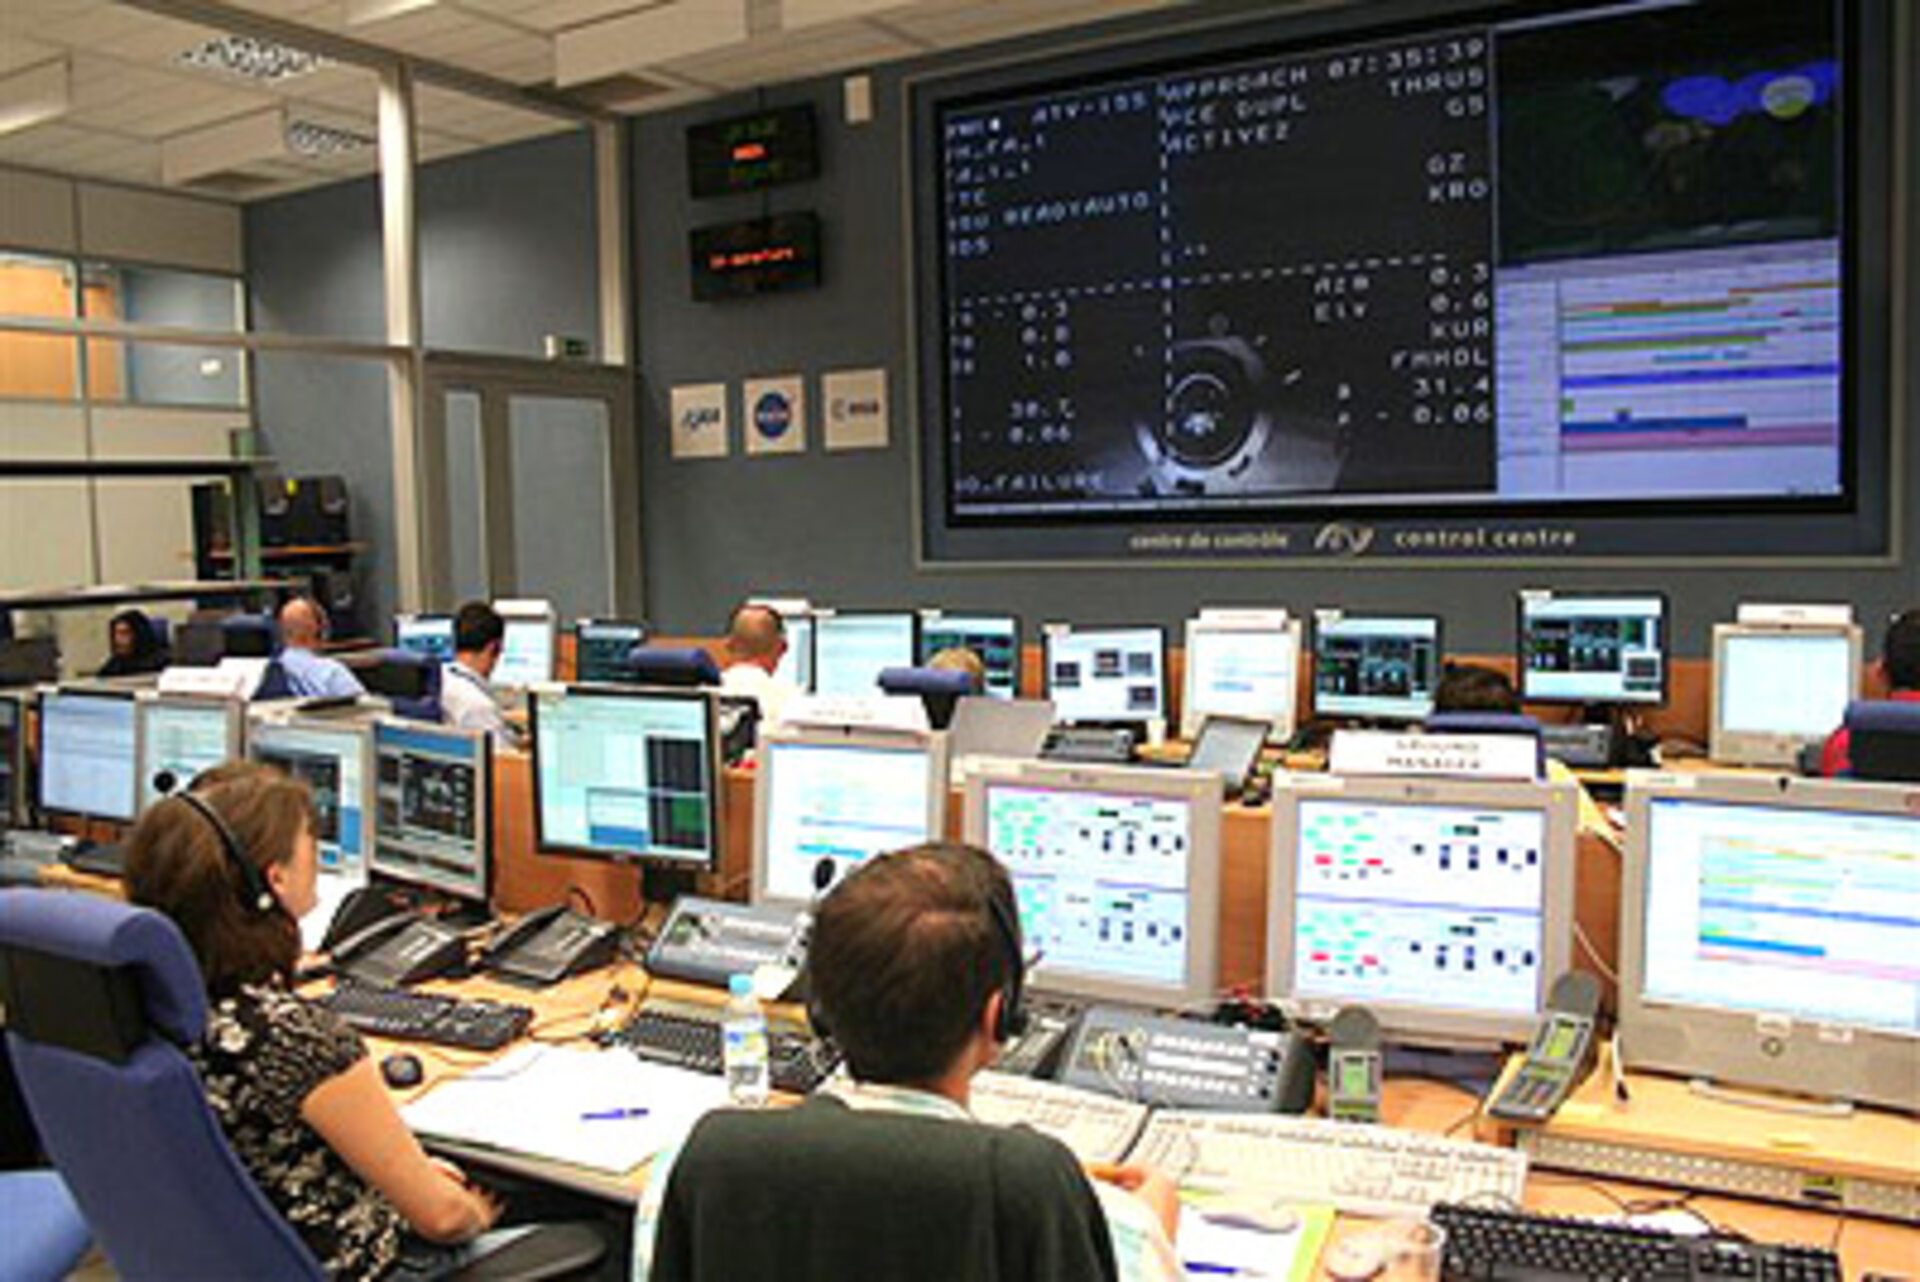 ATV-CC will act as the lead mission control centre during the Jules Verne flight